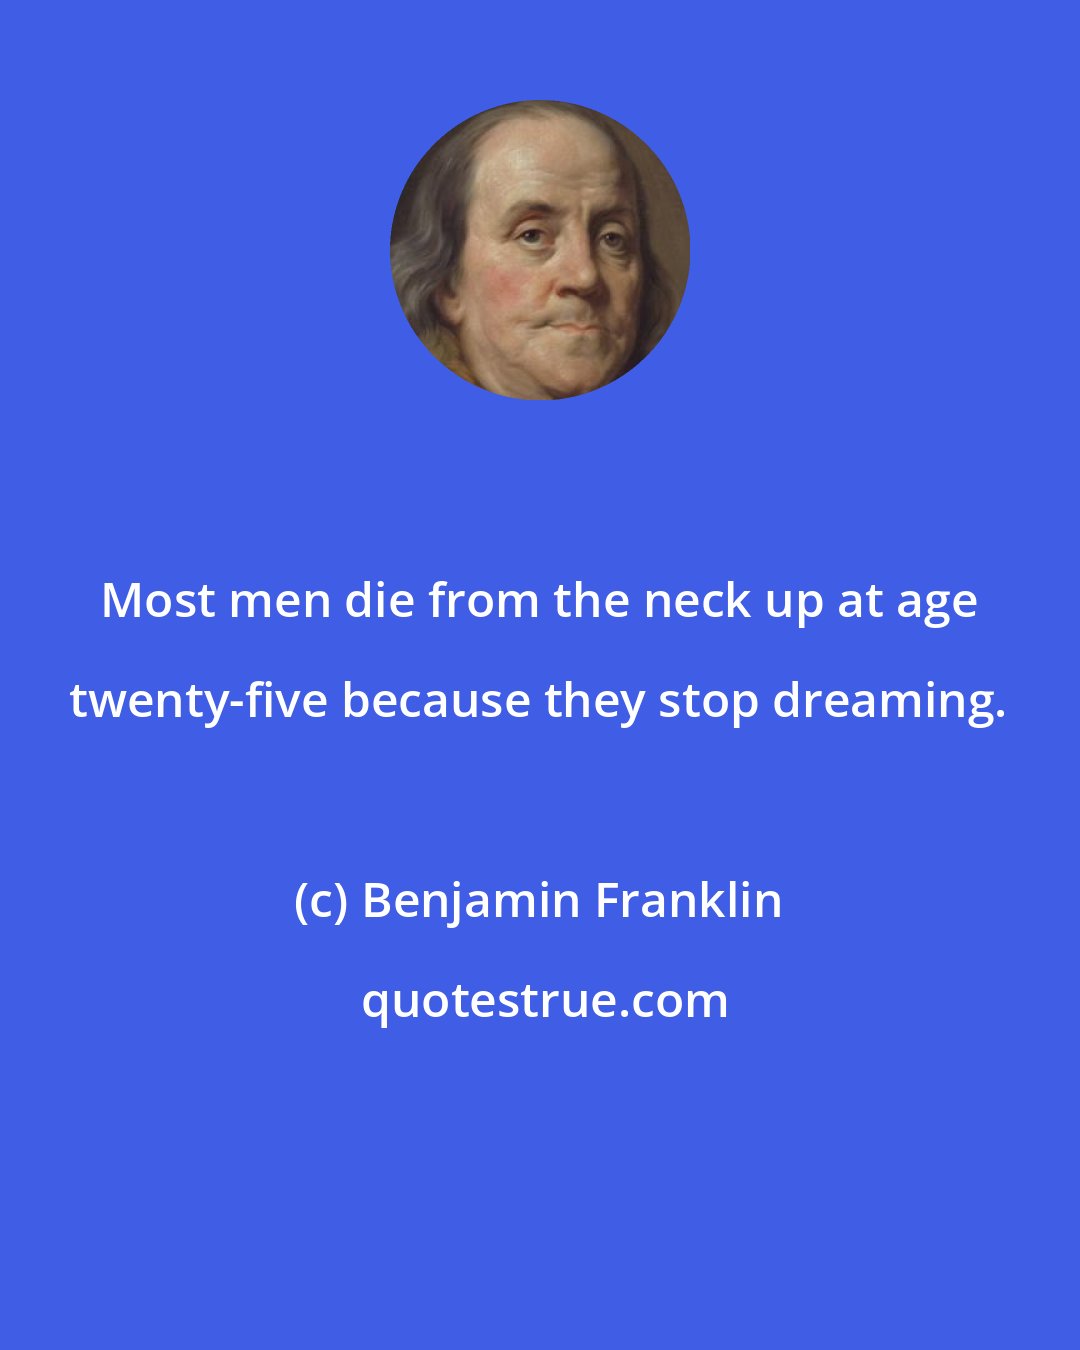 Benjamin Franklin: Most men die from the neck up at age twenty-five because they stop dreaming.